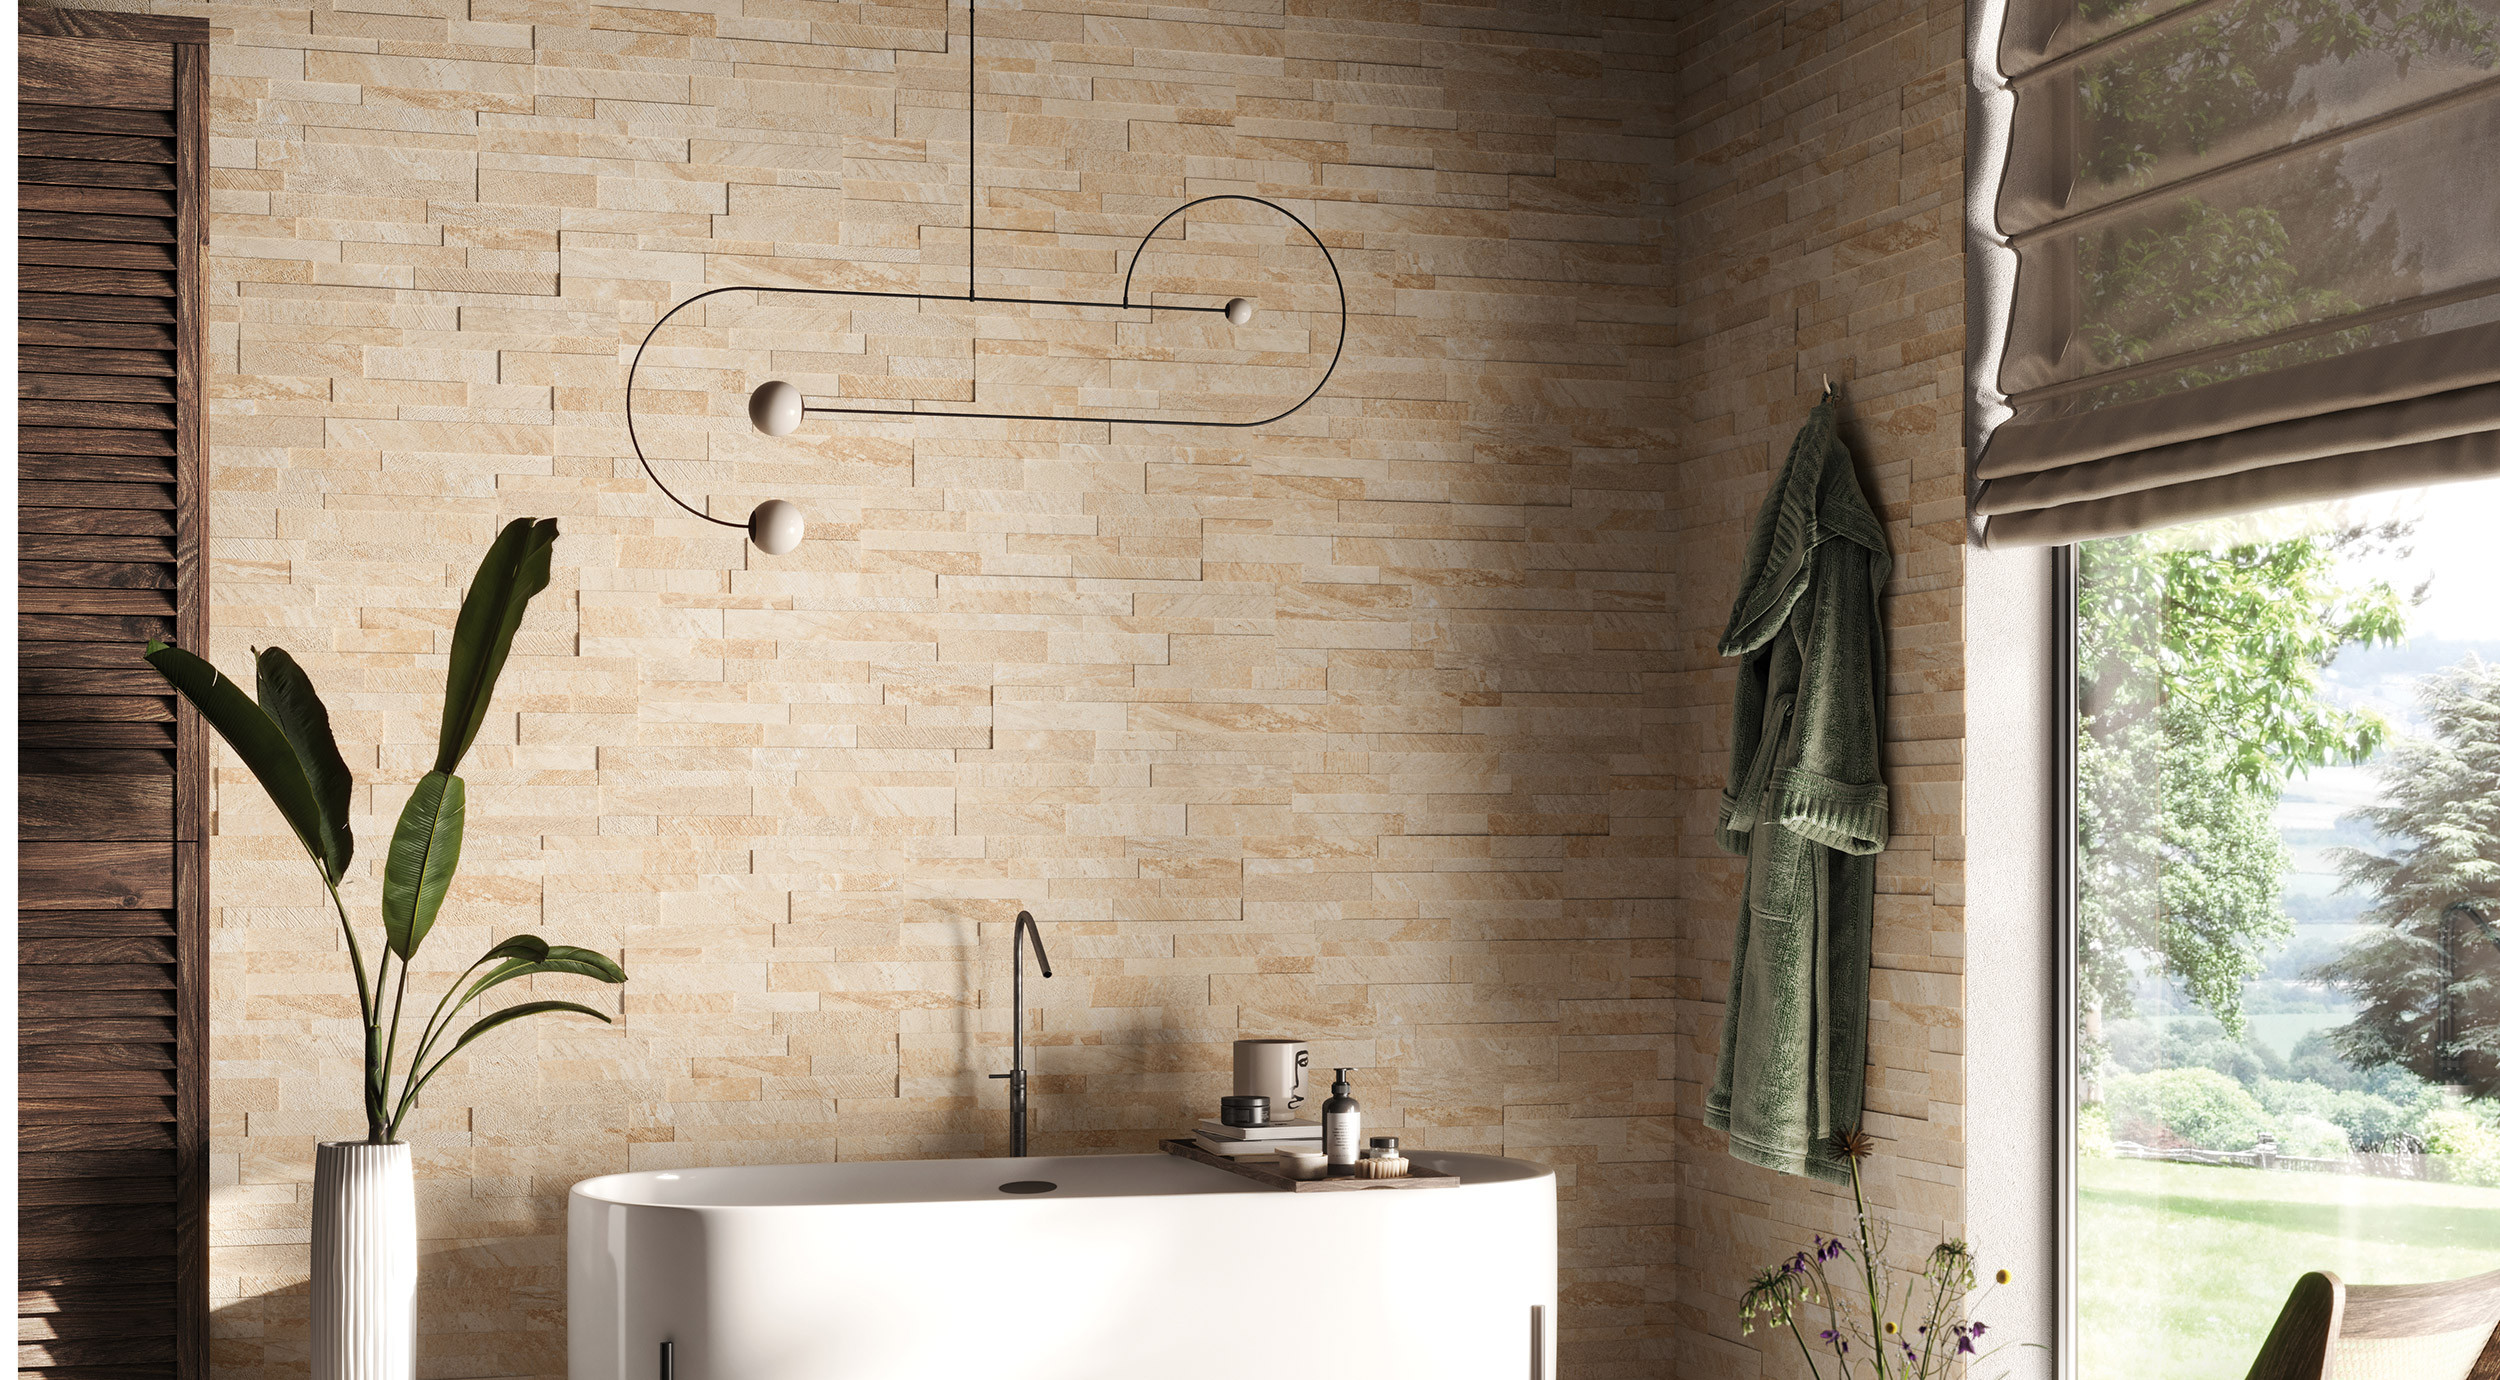 3D wall covering in beige glazed porcelain stoneware, Quarzite series by Ceramica Rondine
